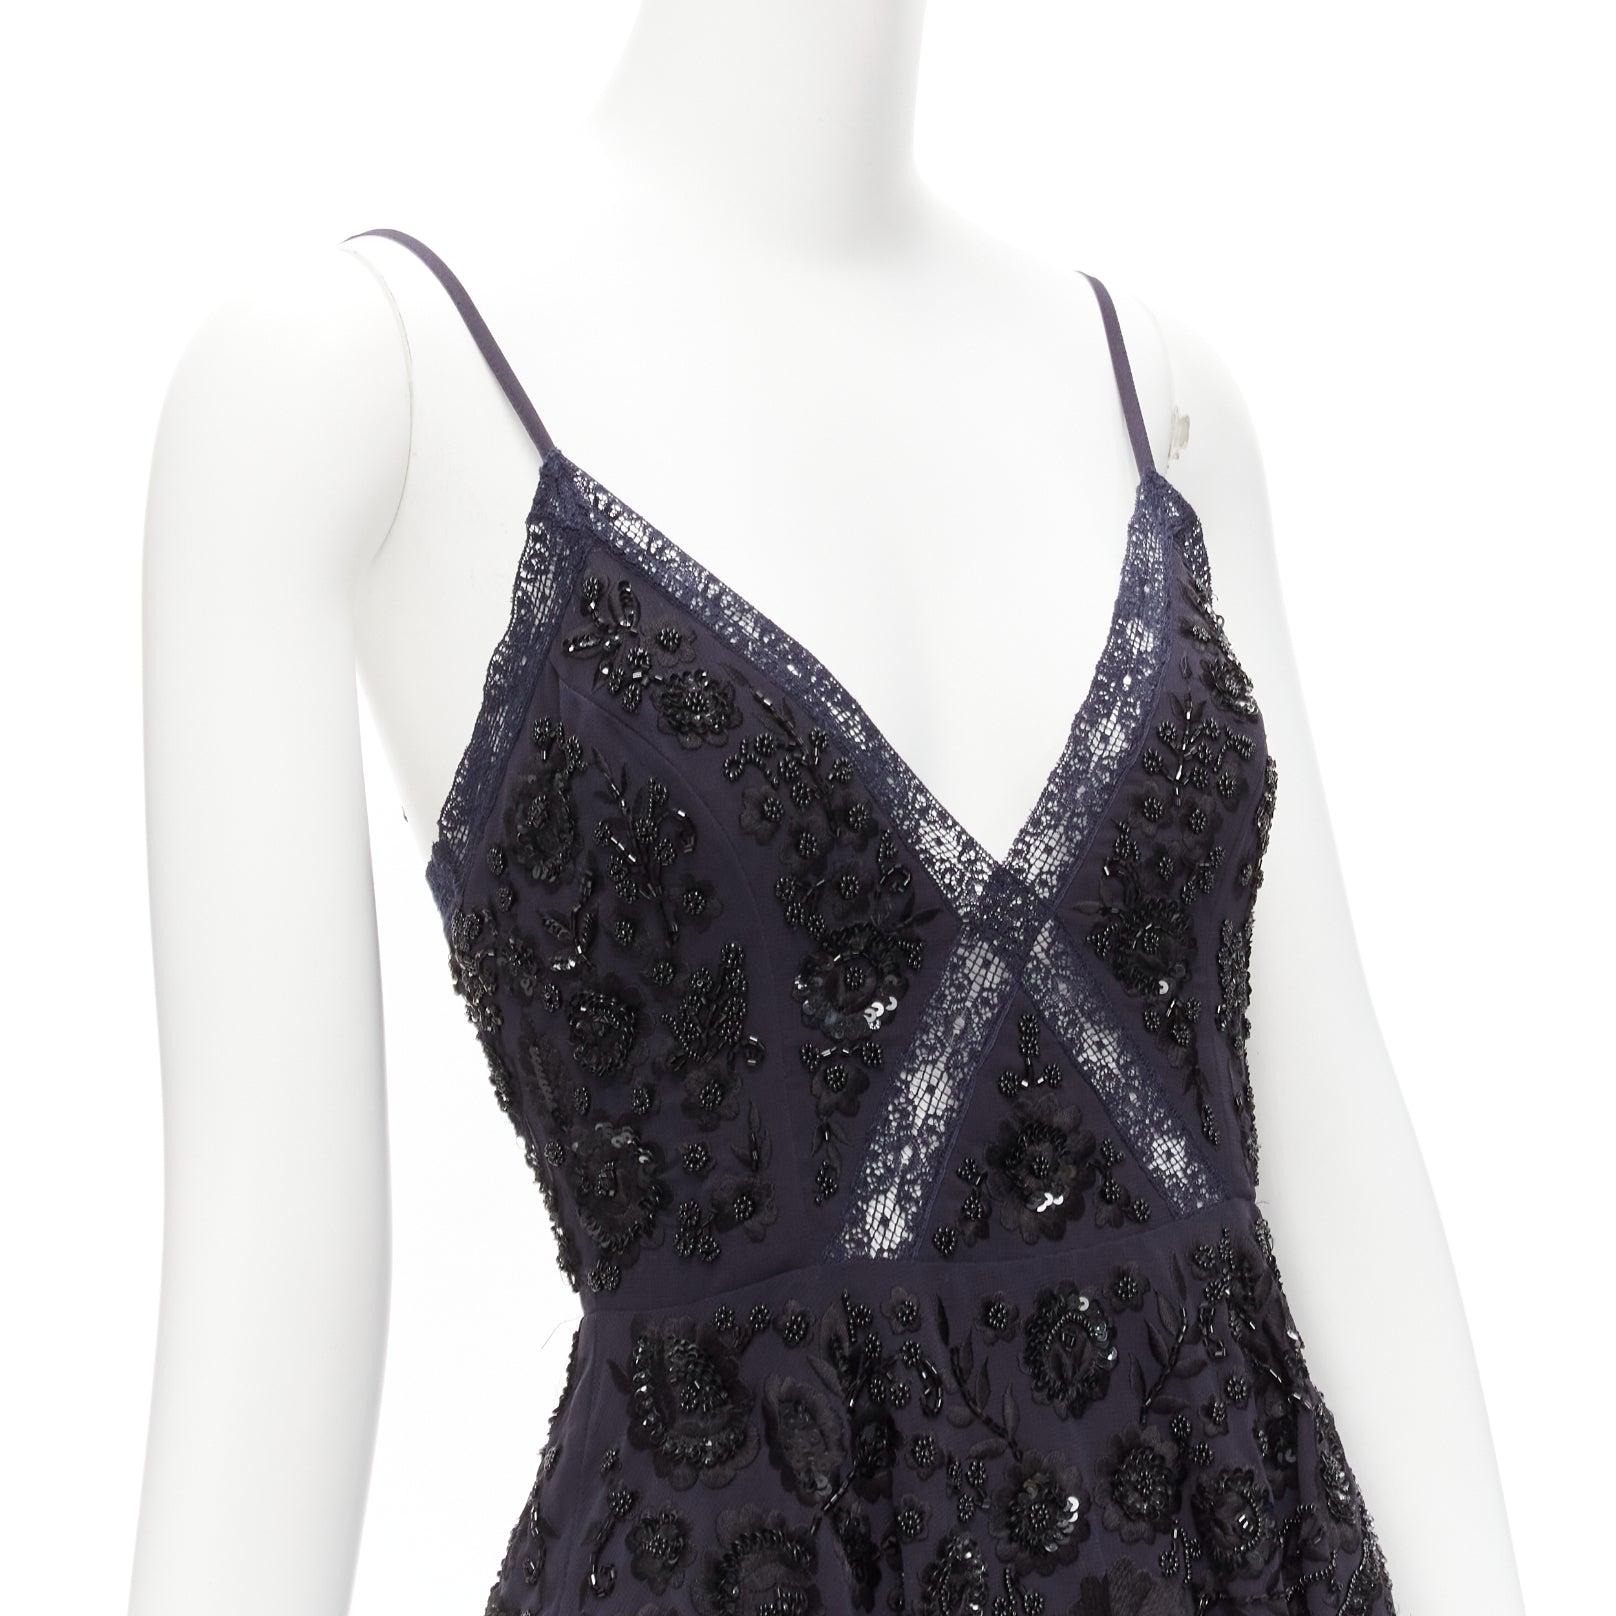 NEEDLE & THREAD navy black floral embellished mini dress UK4 XXS
Reference: SNKO/A00408
Brand: Needle & Thread
Material: Fabric
Color: Navy, Black
Pattern: Floral
Closure: Zip
Lining: Navy Fabric
Extra Details: Back zip. Embellishment also at back.